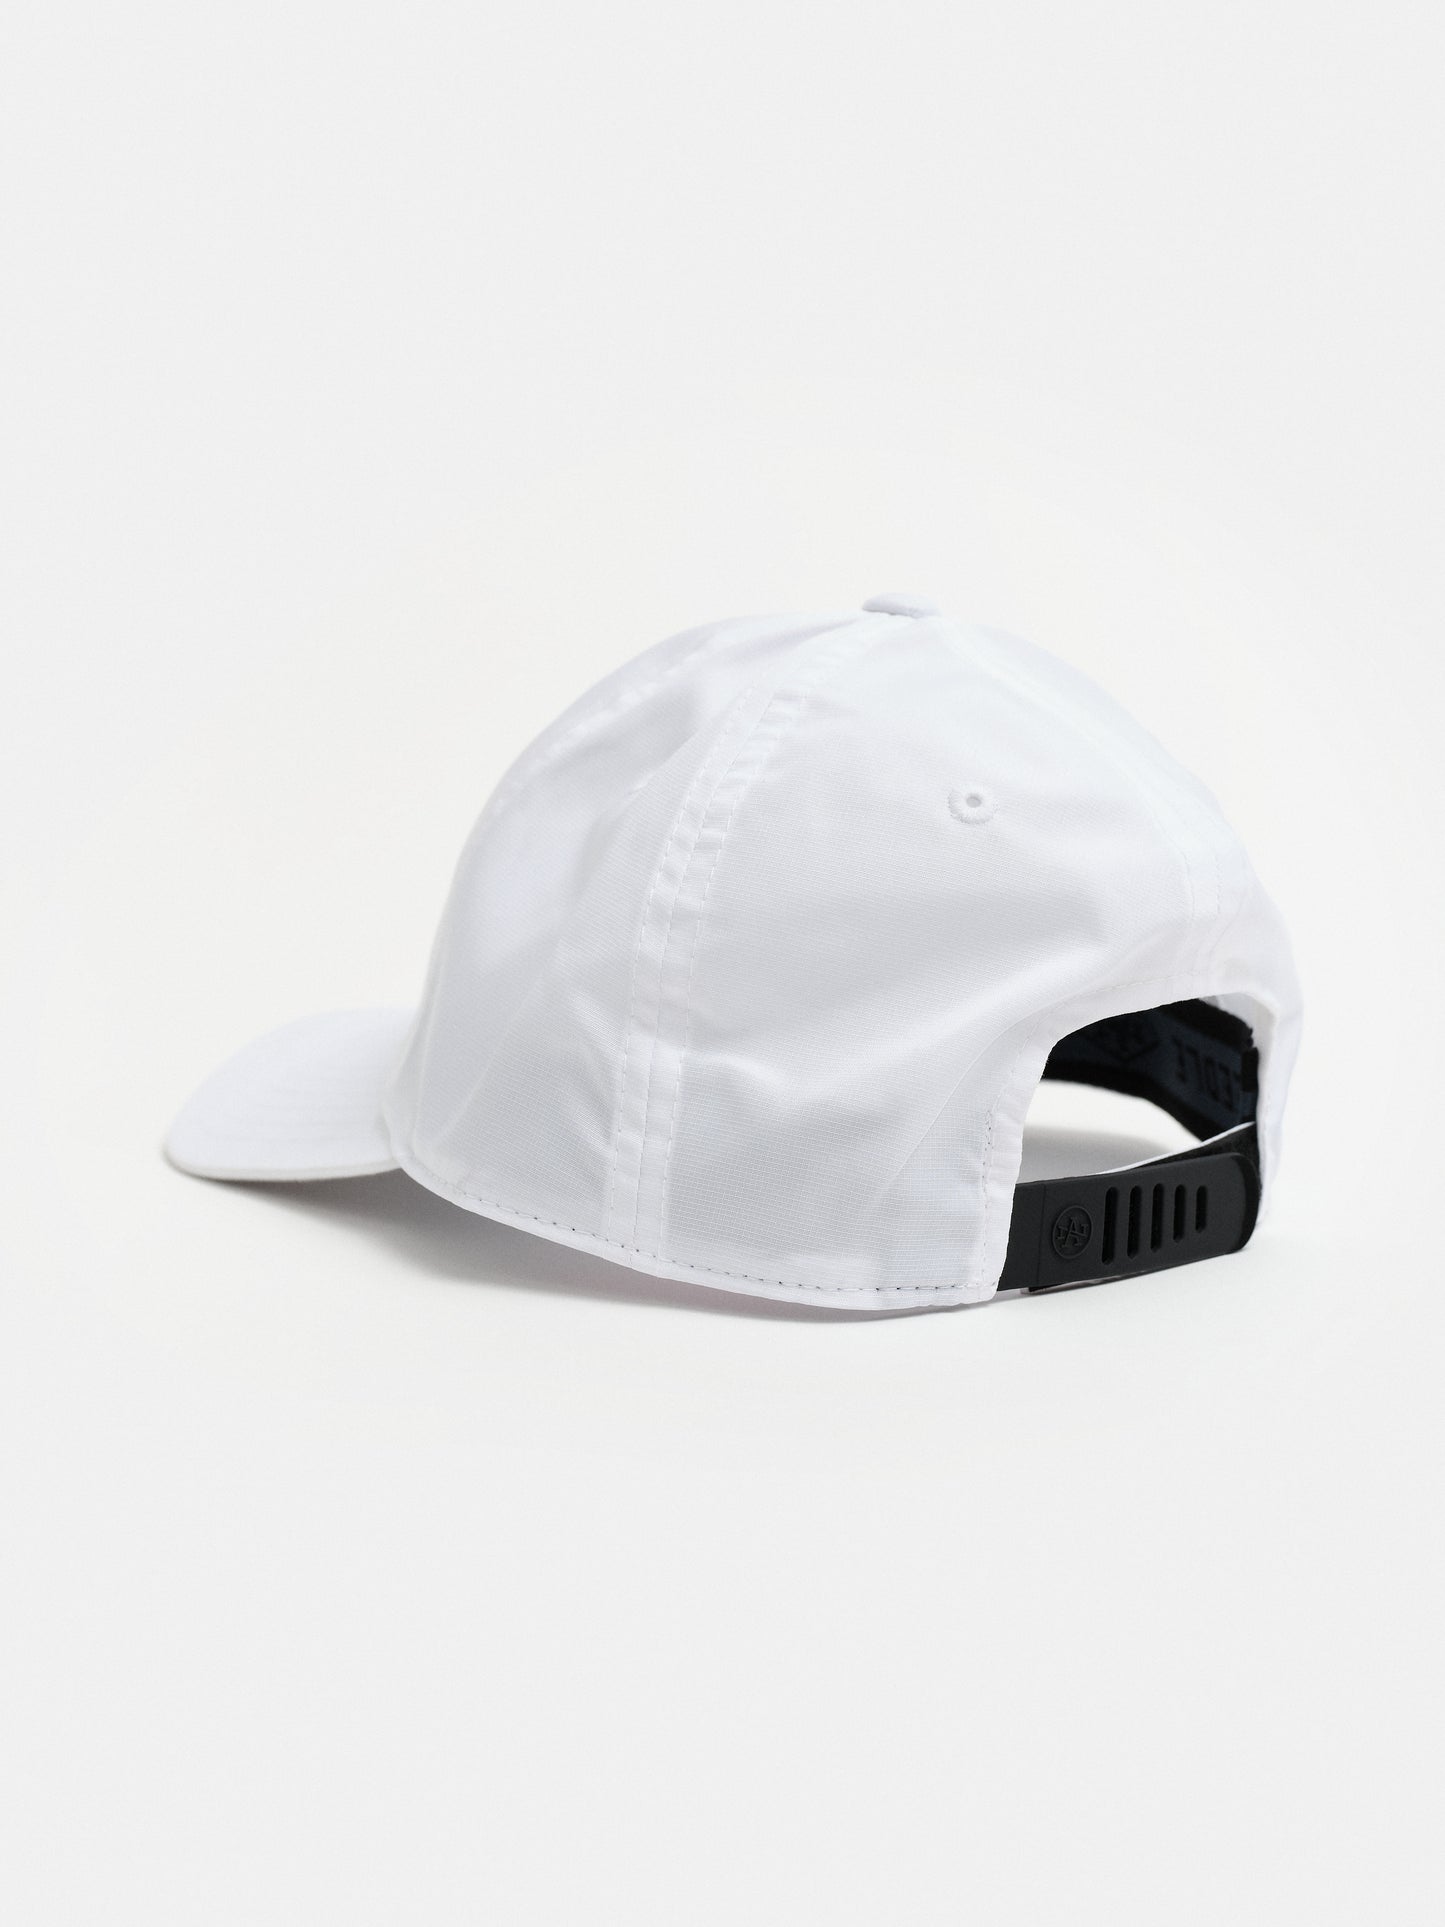 Performance Golf Hat in White